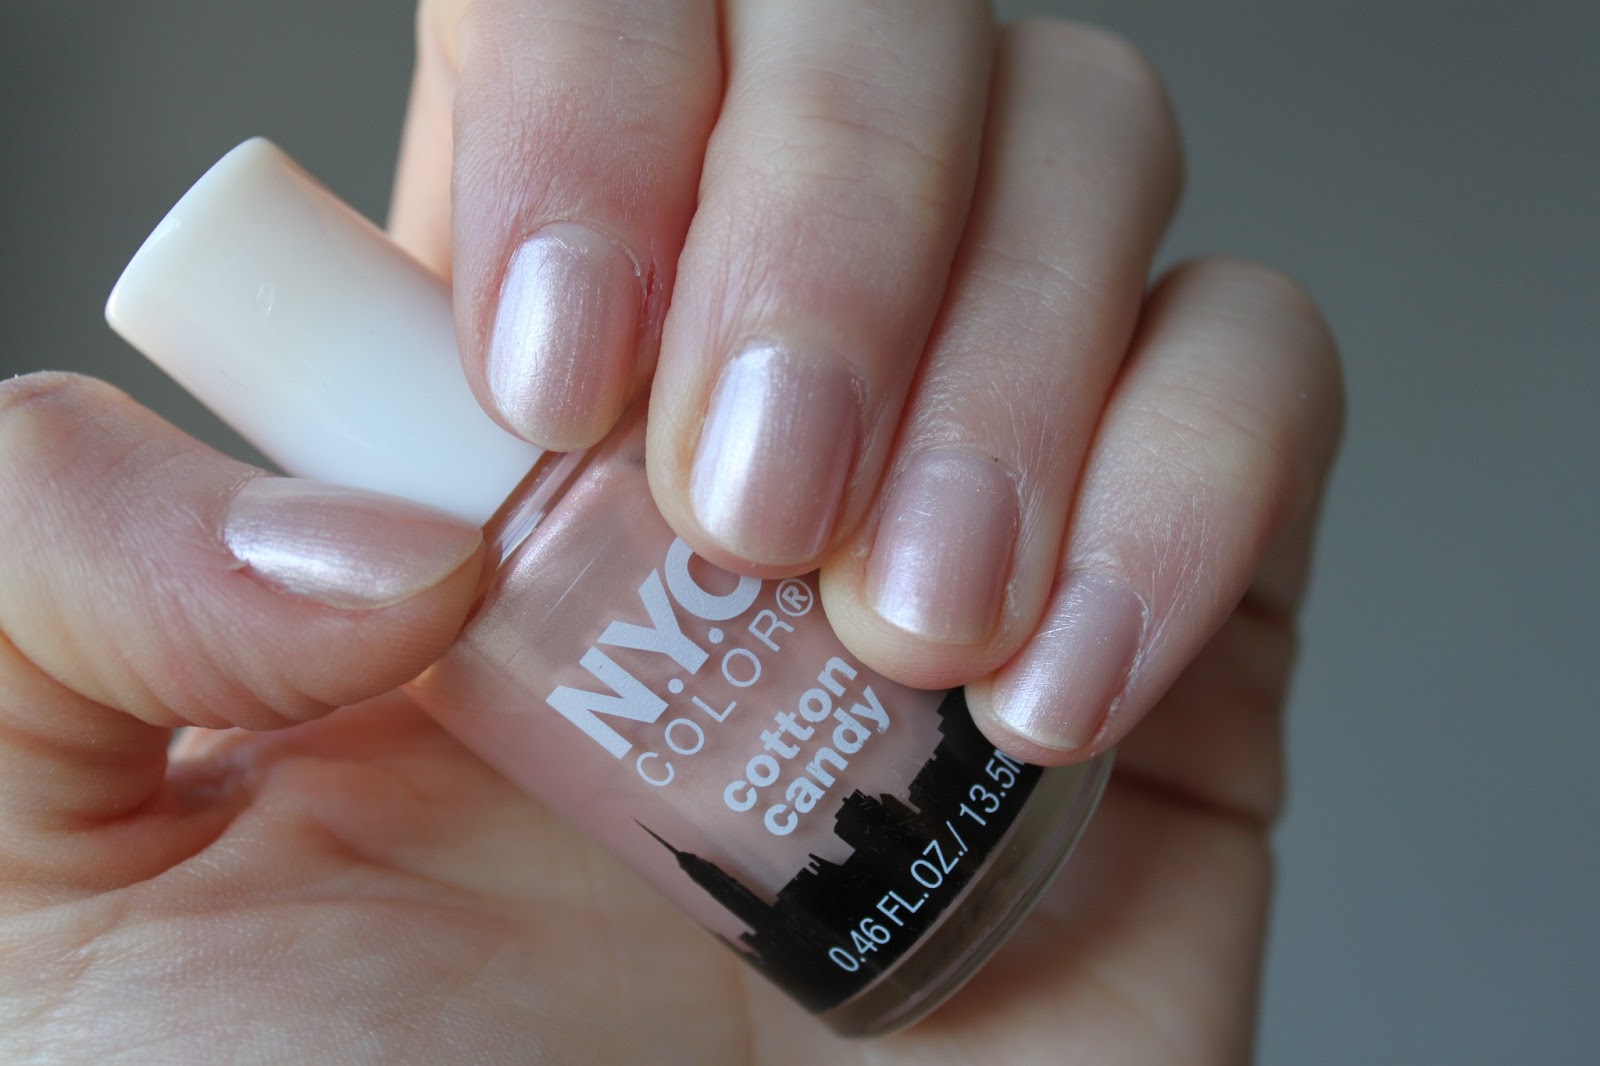 9. Orly Nail Lacquer in "Cotton Candy" - wide 7